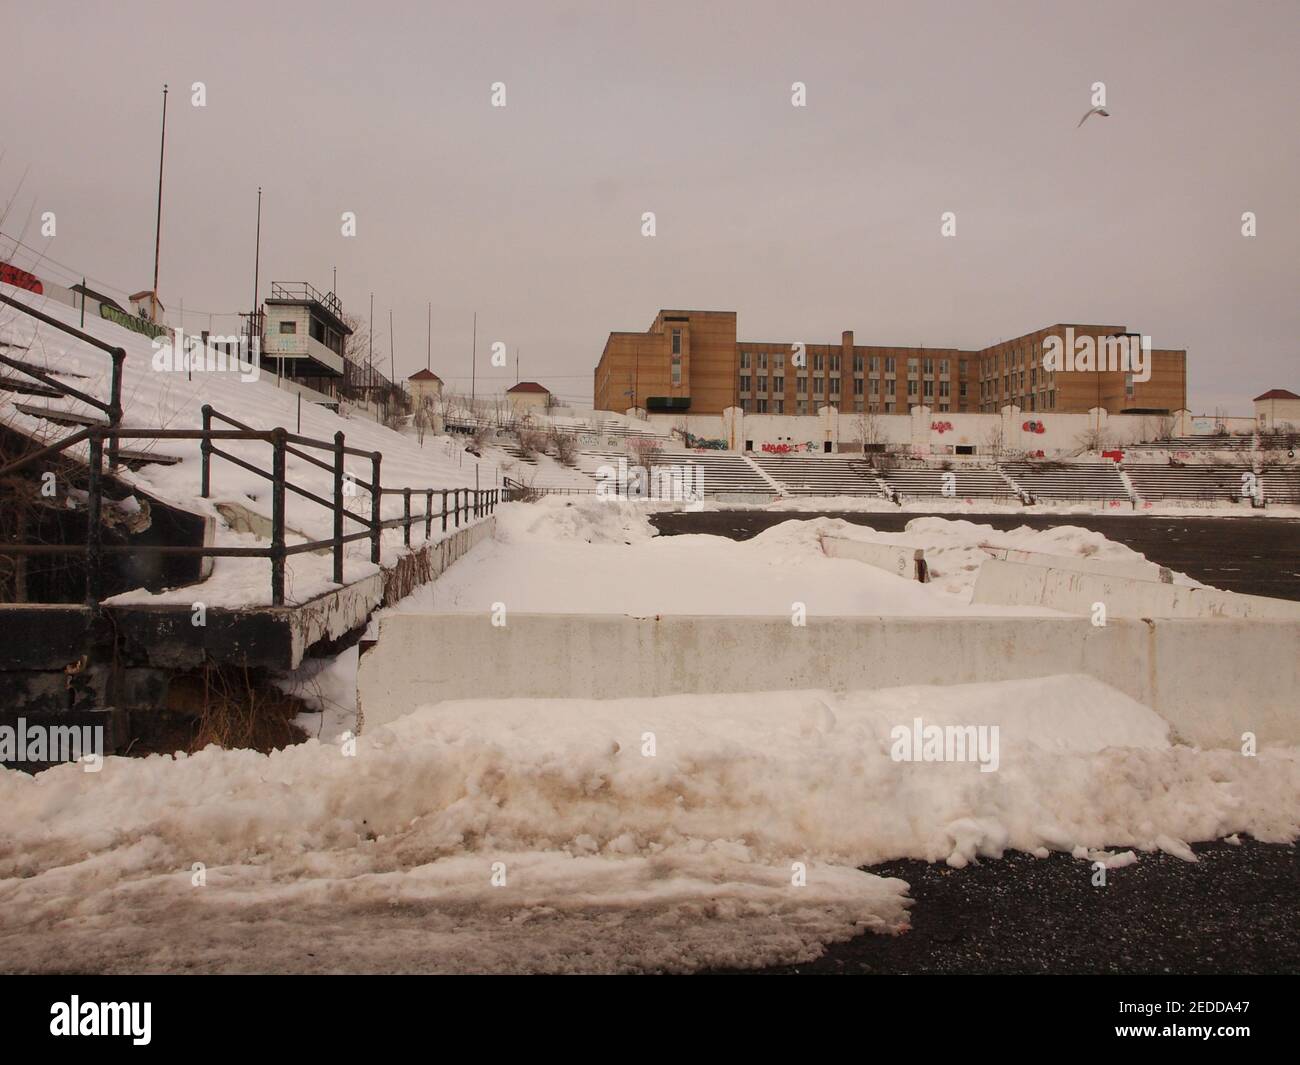 Snow covered Hinchliff stadium in Paterson, New Jersey. Now under control of the National Park Service along with the Great Falls nearby. Stock Photo